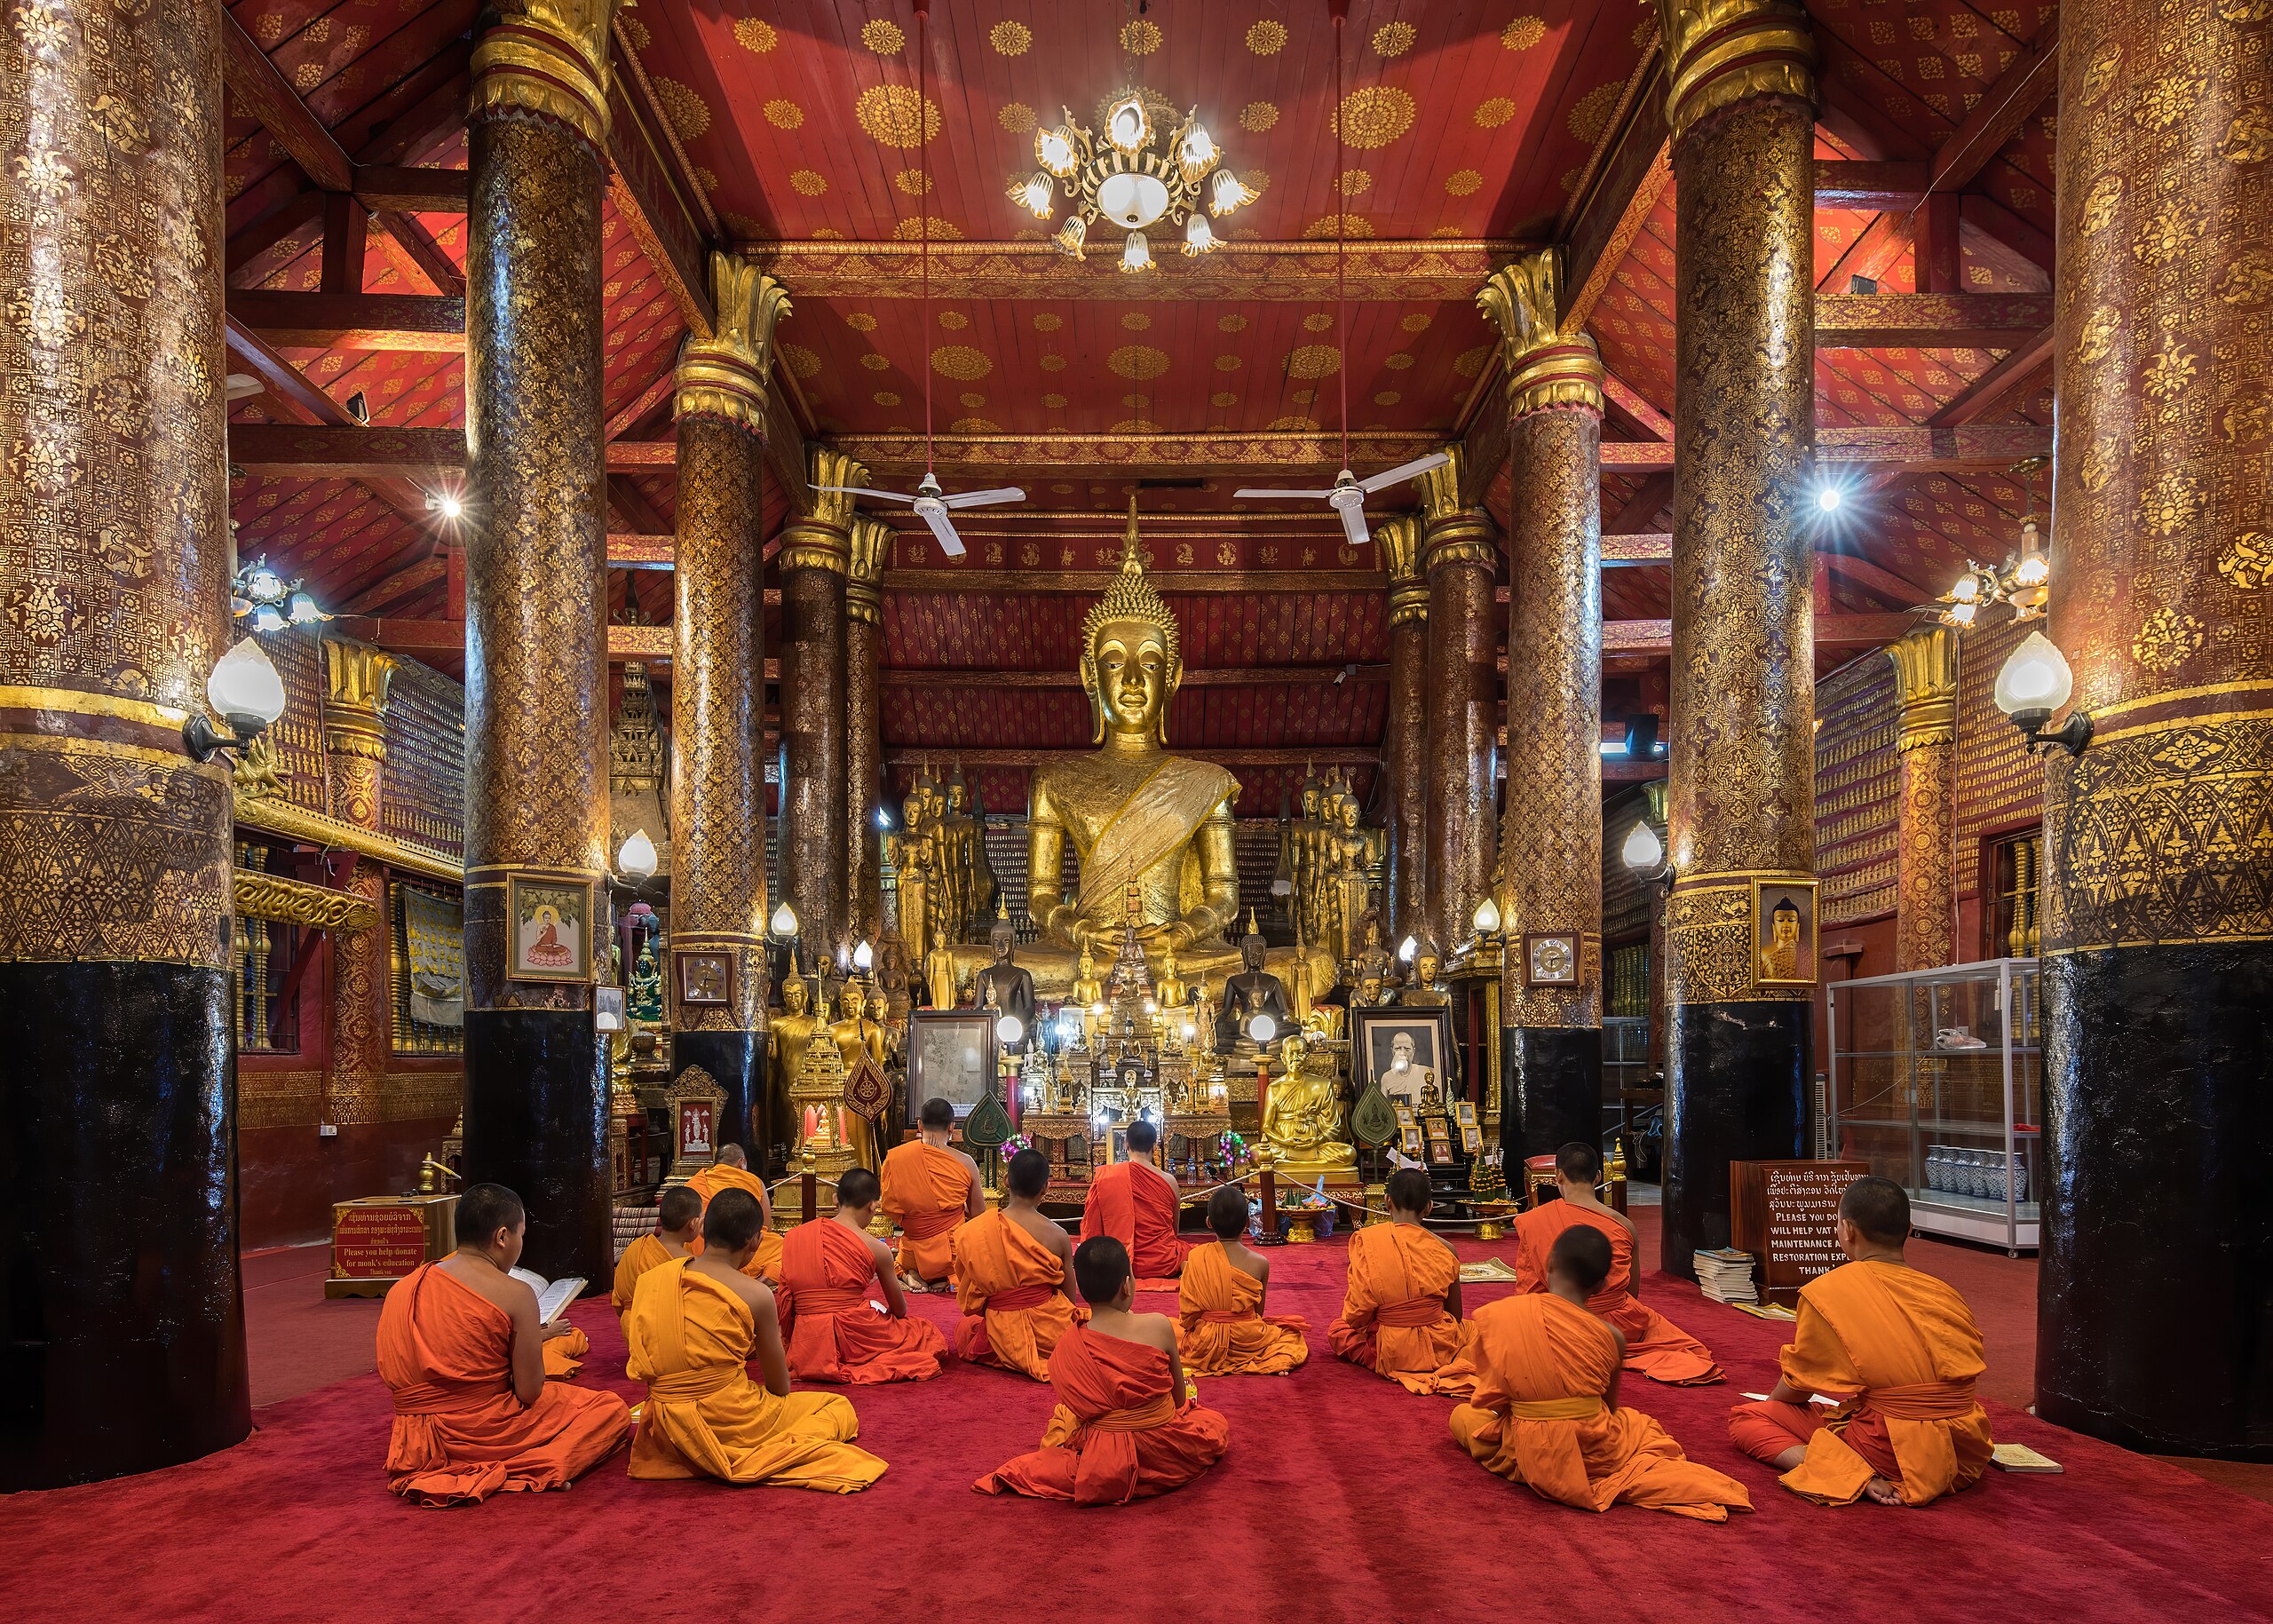 A group of monks sitting on the floor in front of a large Buddha, practicing Buddhism.